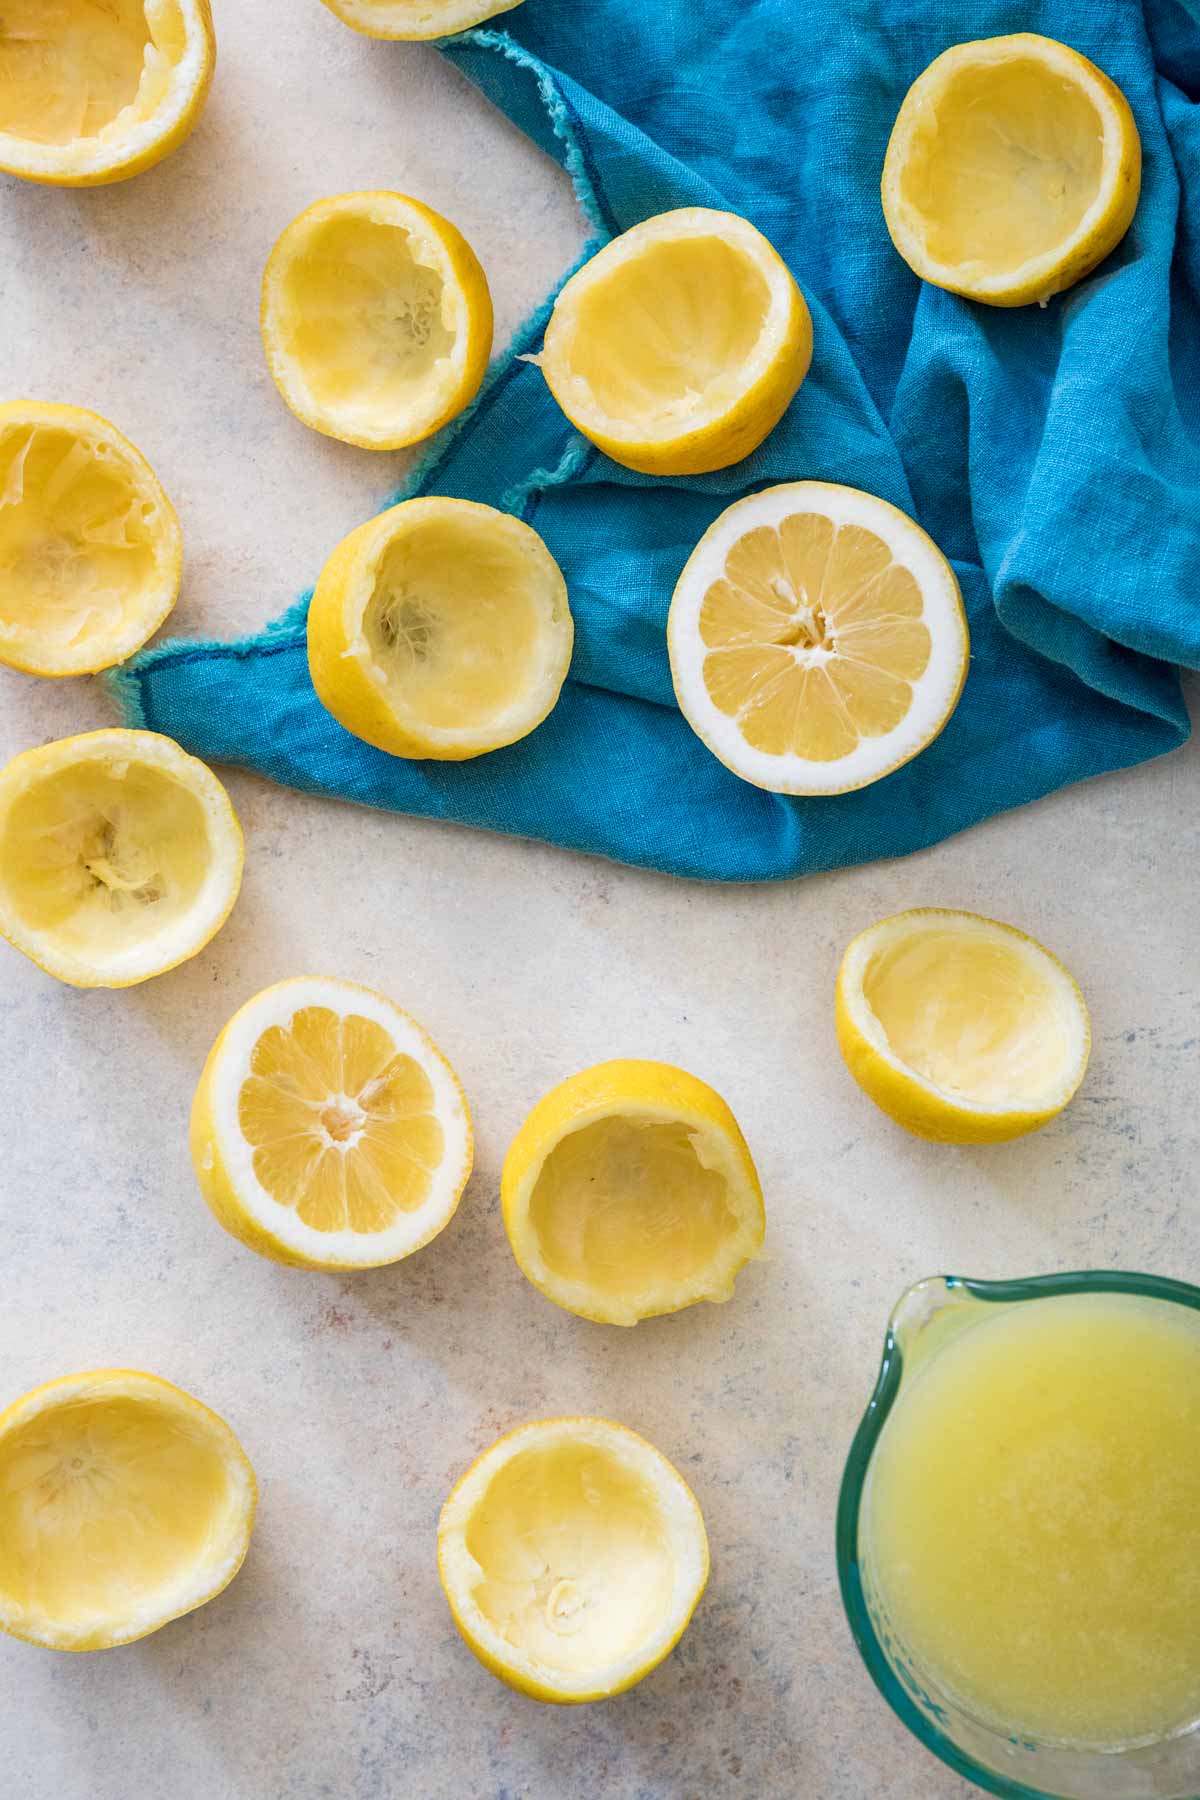 juiced and unjuiced lemon halves scattered on a white counter